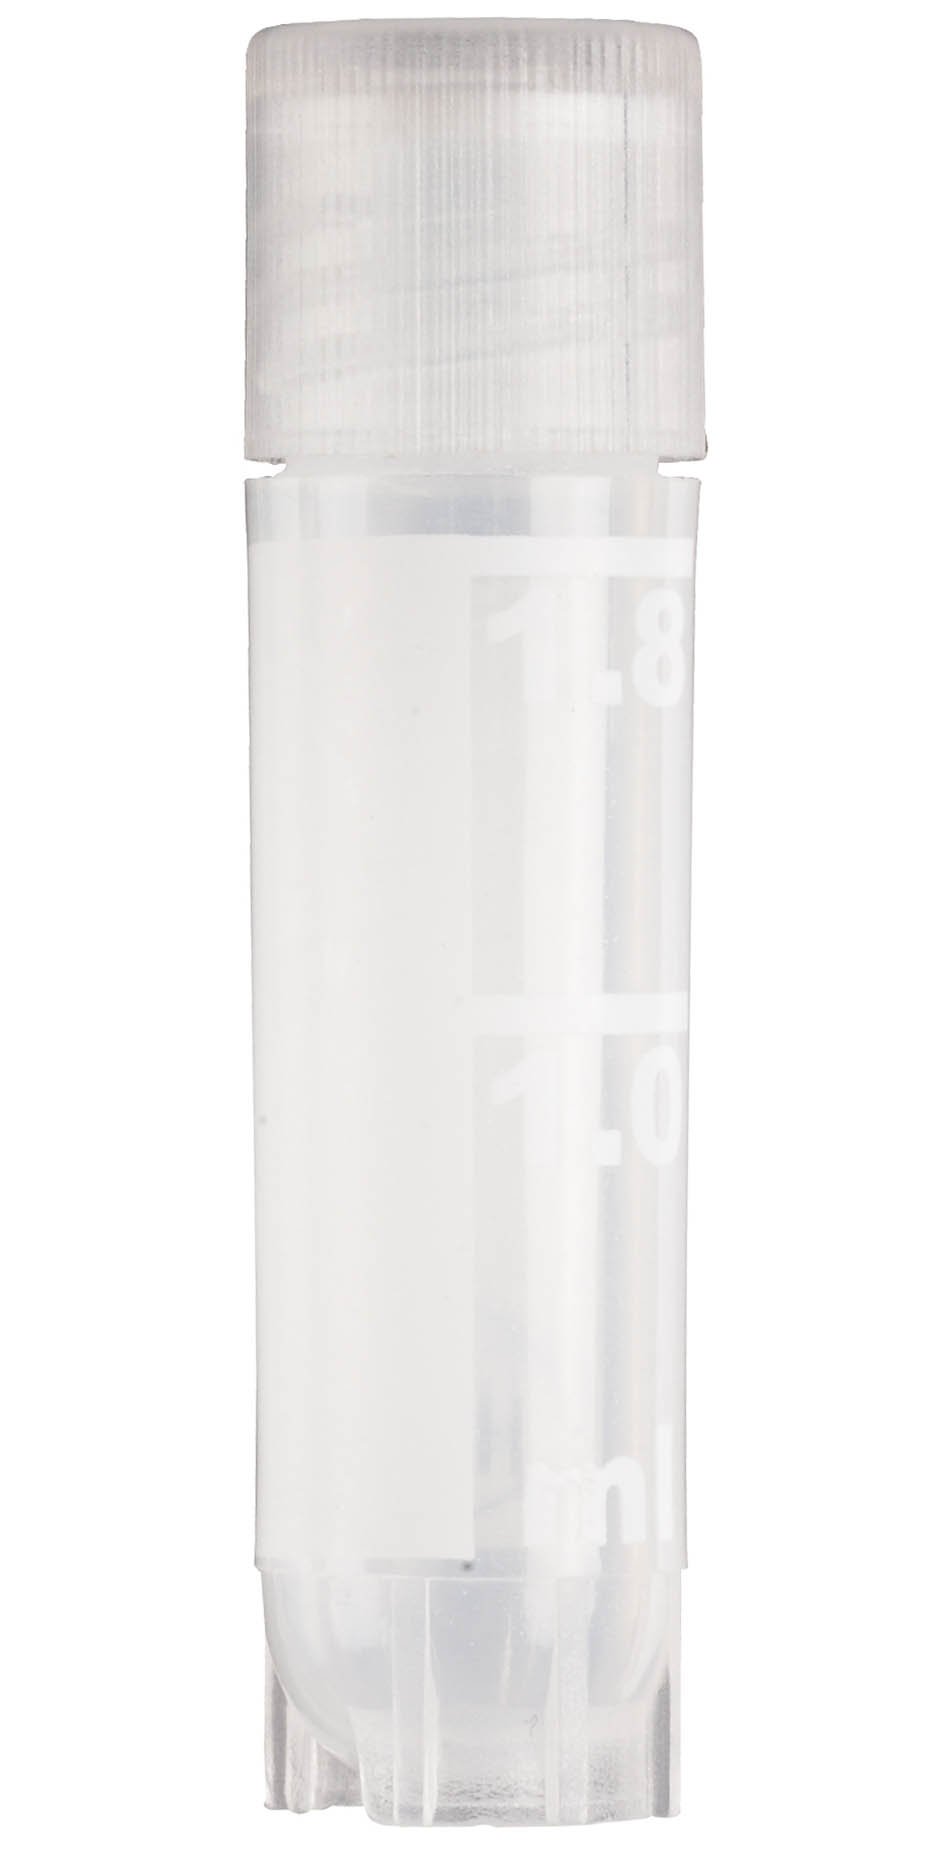 True North Cryogenic Sample Vial 2.0 mL with Natural Lid